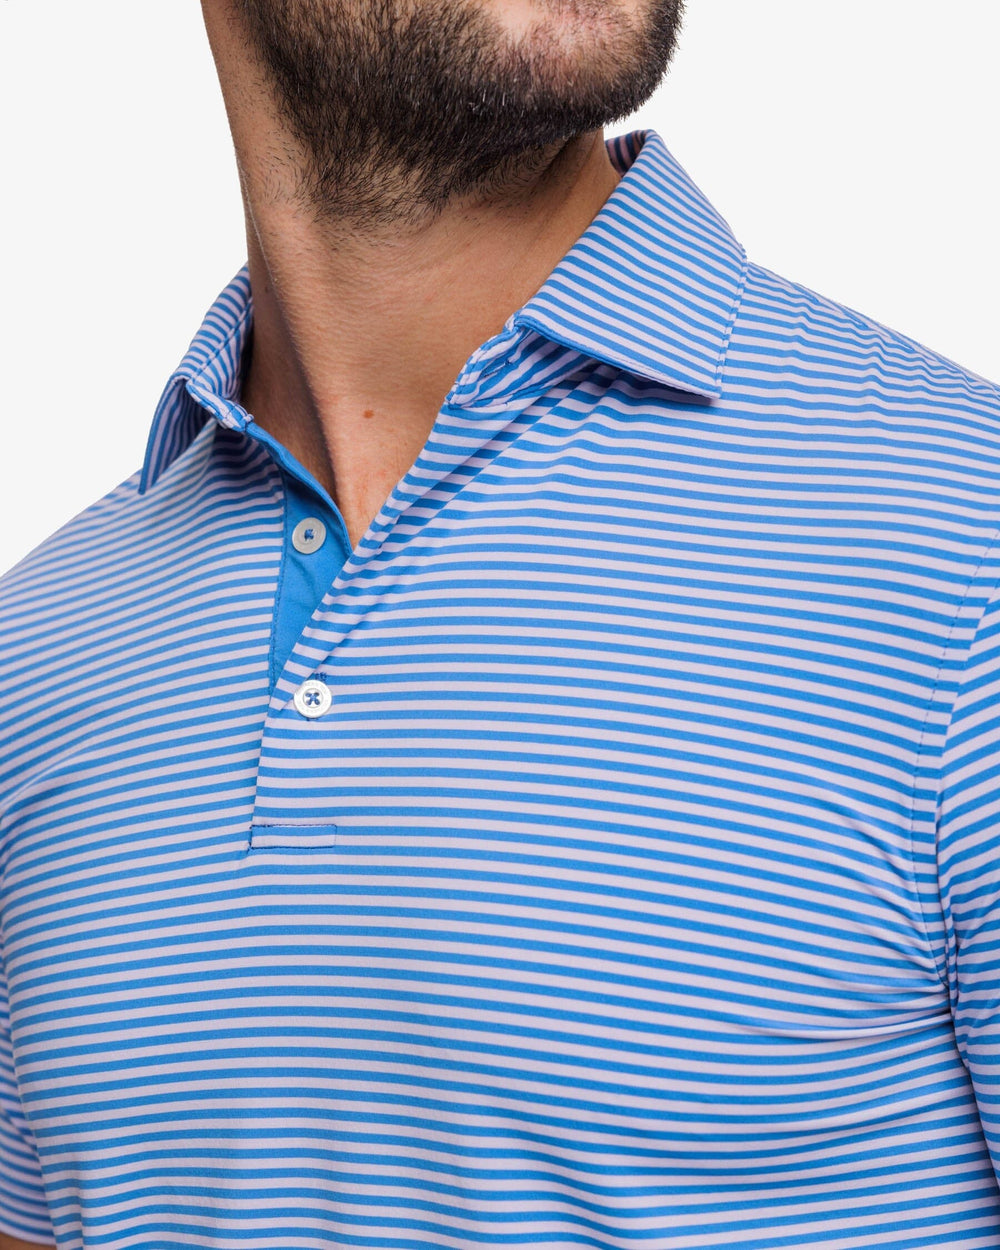 The detail view of the Southern Tide Shores Stripe brrr eeze Performance Polo Shirt by Southern Tide - Light Purple